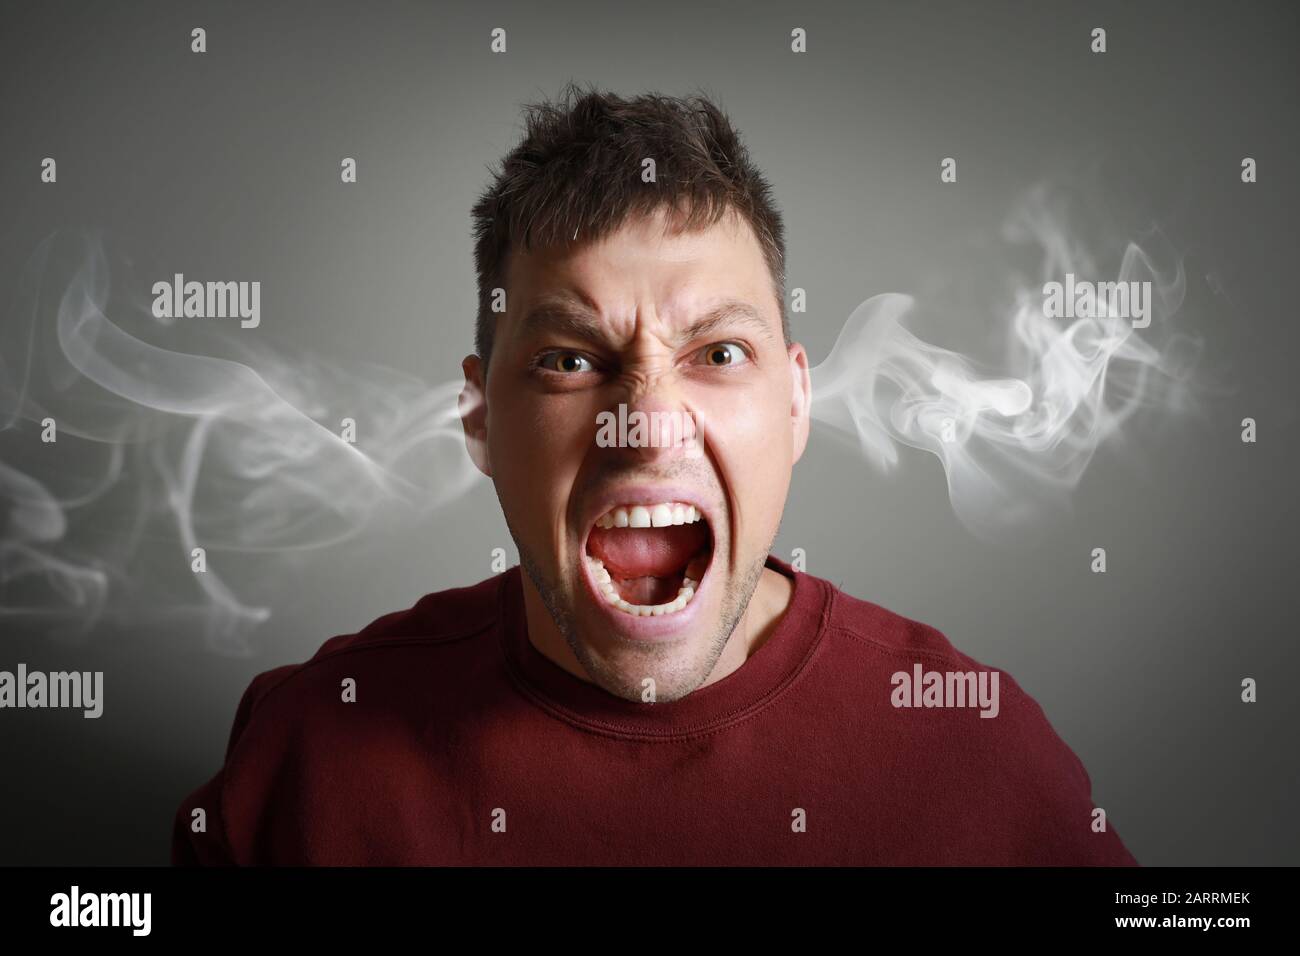 Portrait of angry man with steam coming out of ears on grey background Stock Photo